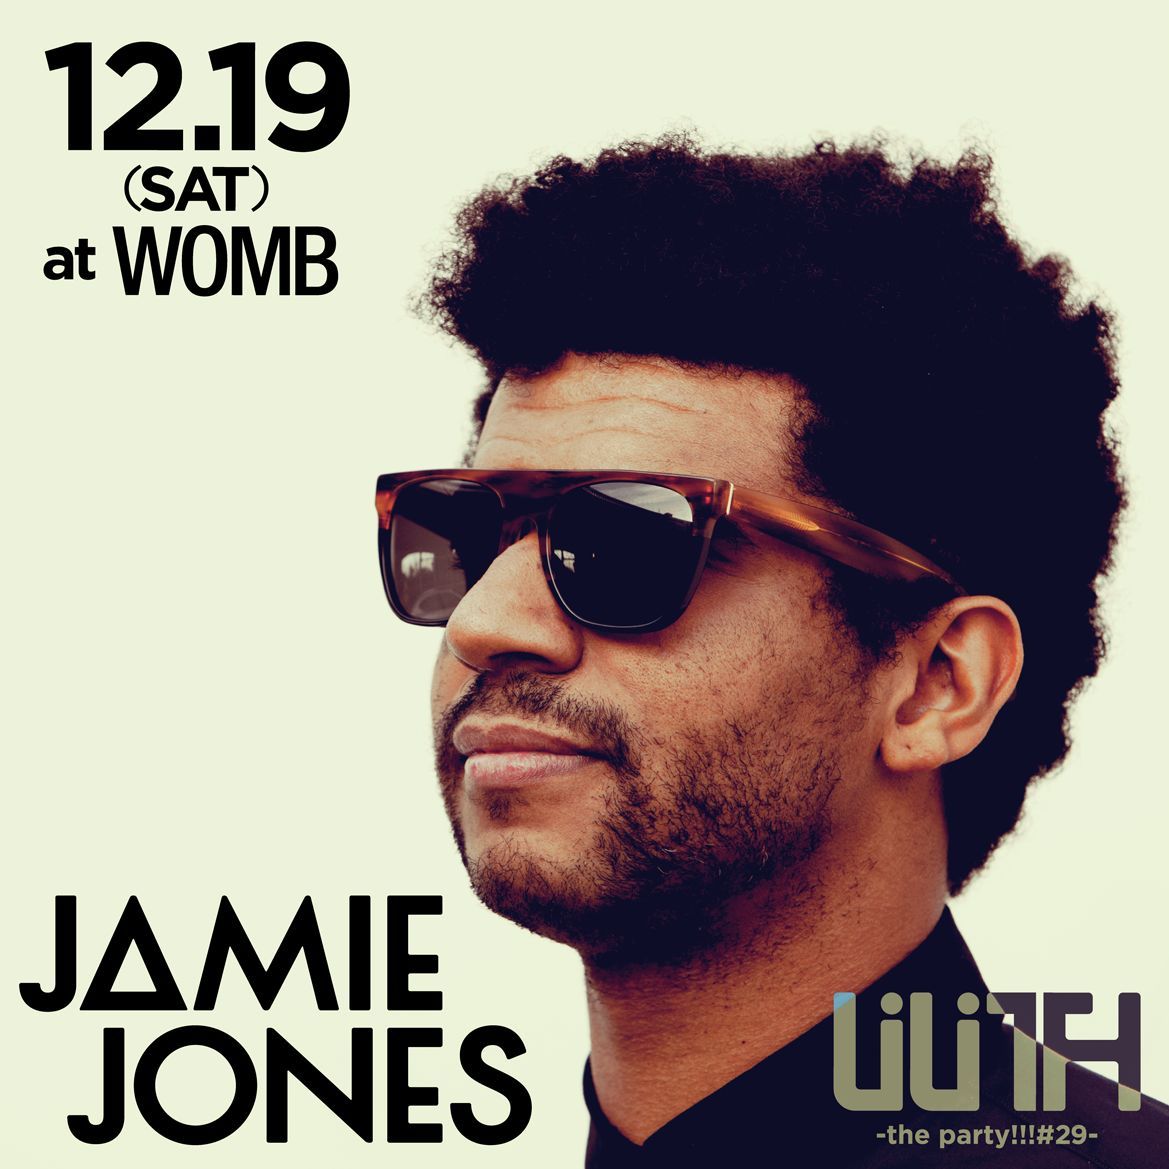 LiLiTH “THE PARTY”#29 feat. JAMIE JONES